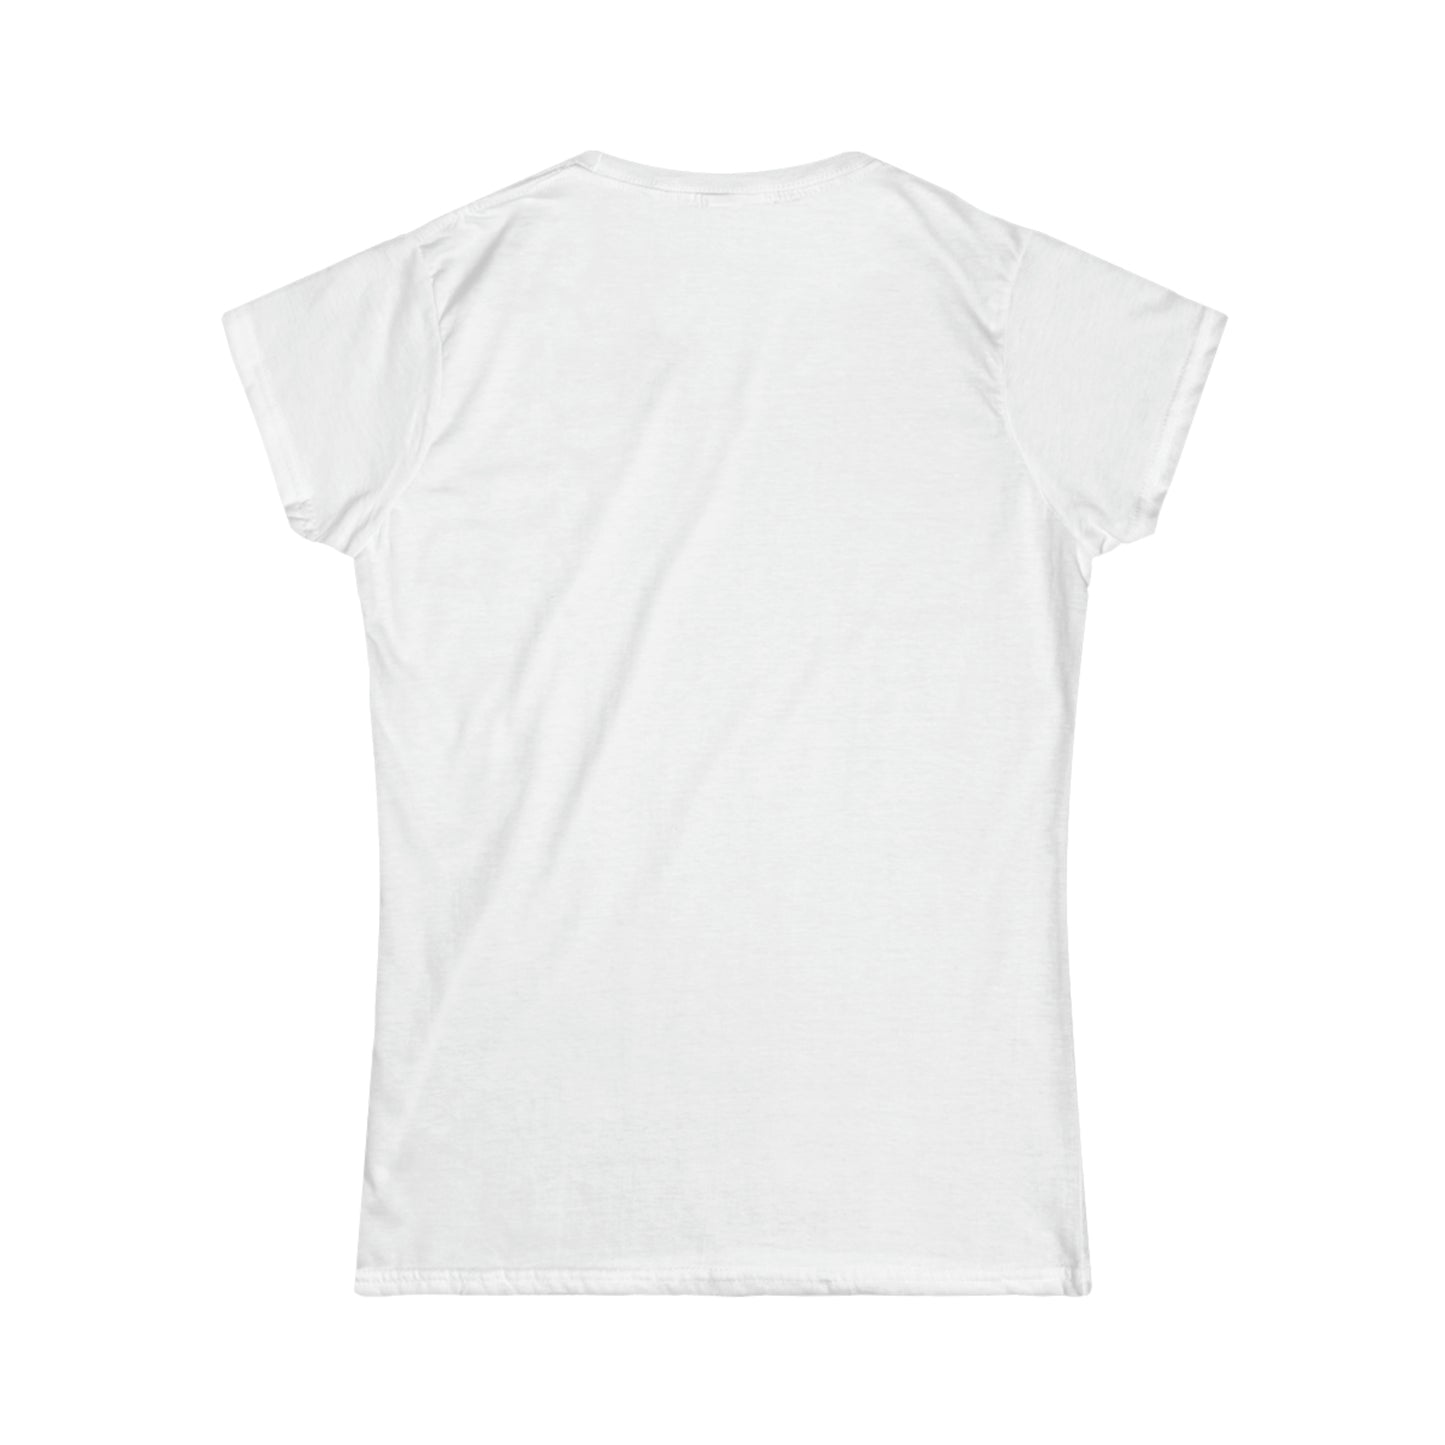 Be Soul Food Women's Softstyle Tee